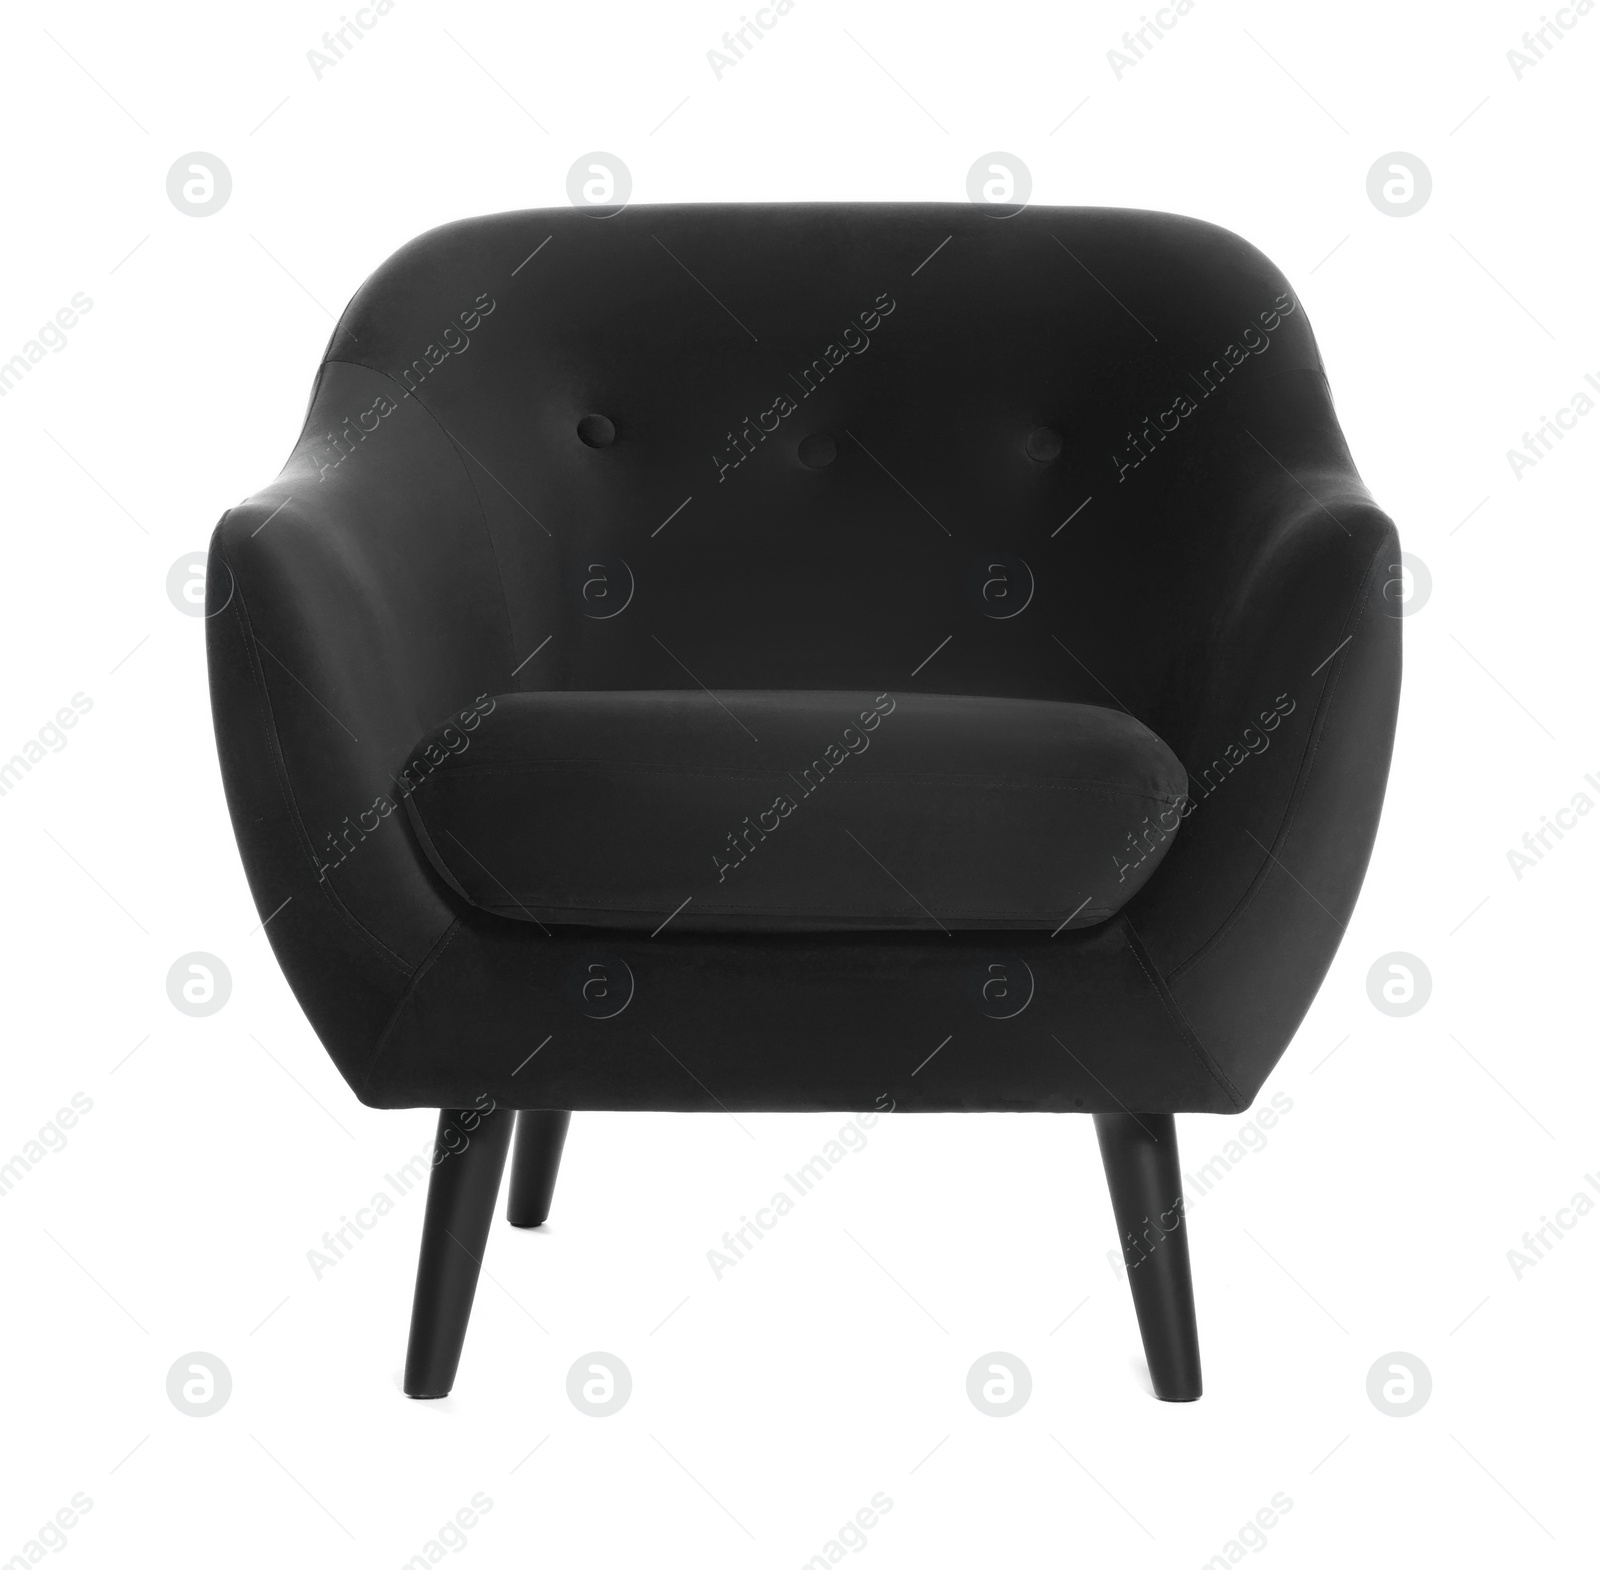 Image of One comfortable dark grey armchair isolated on white